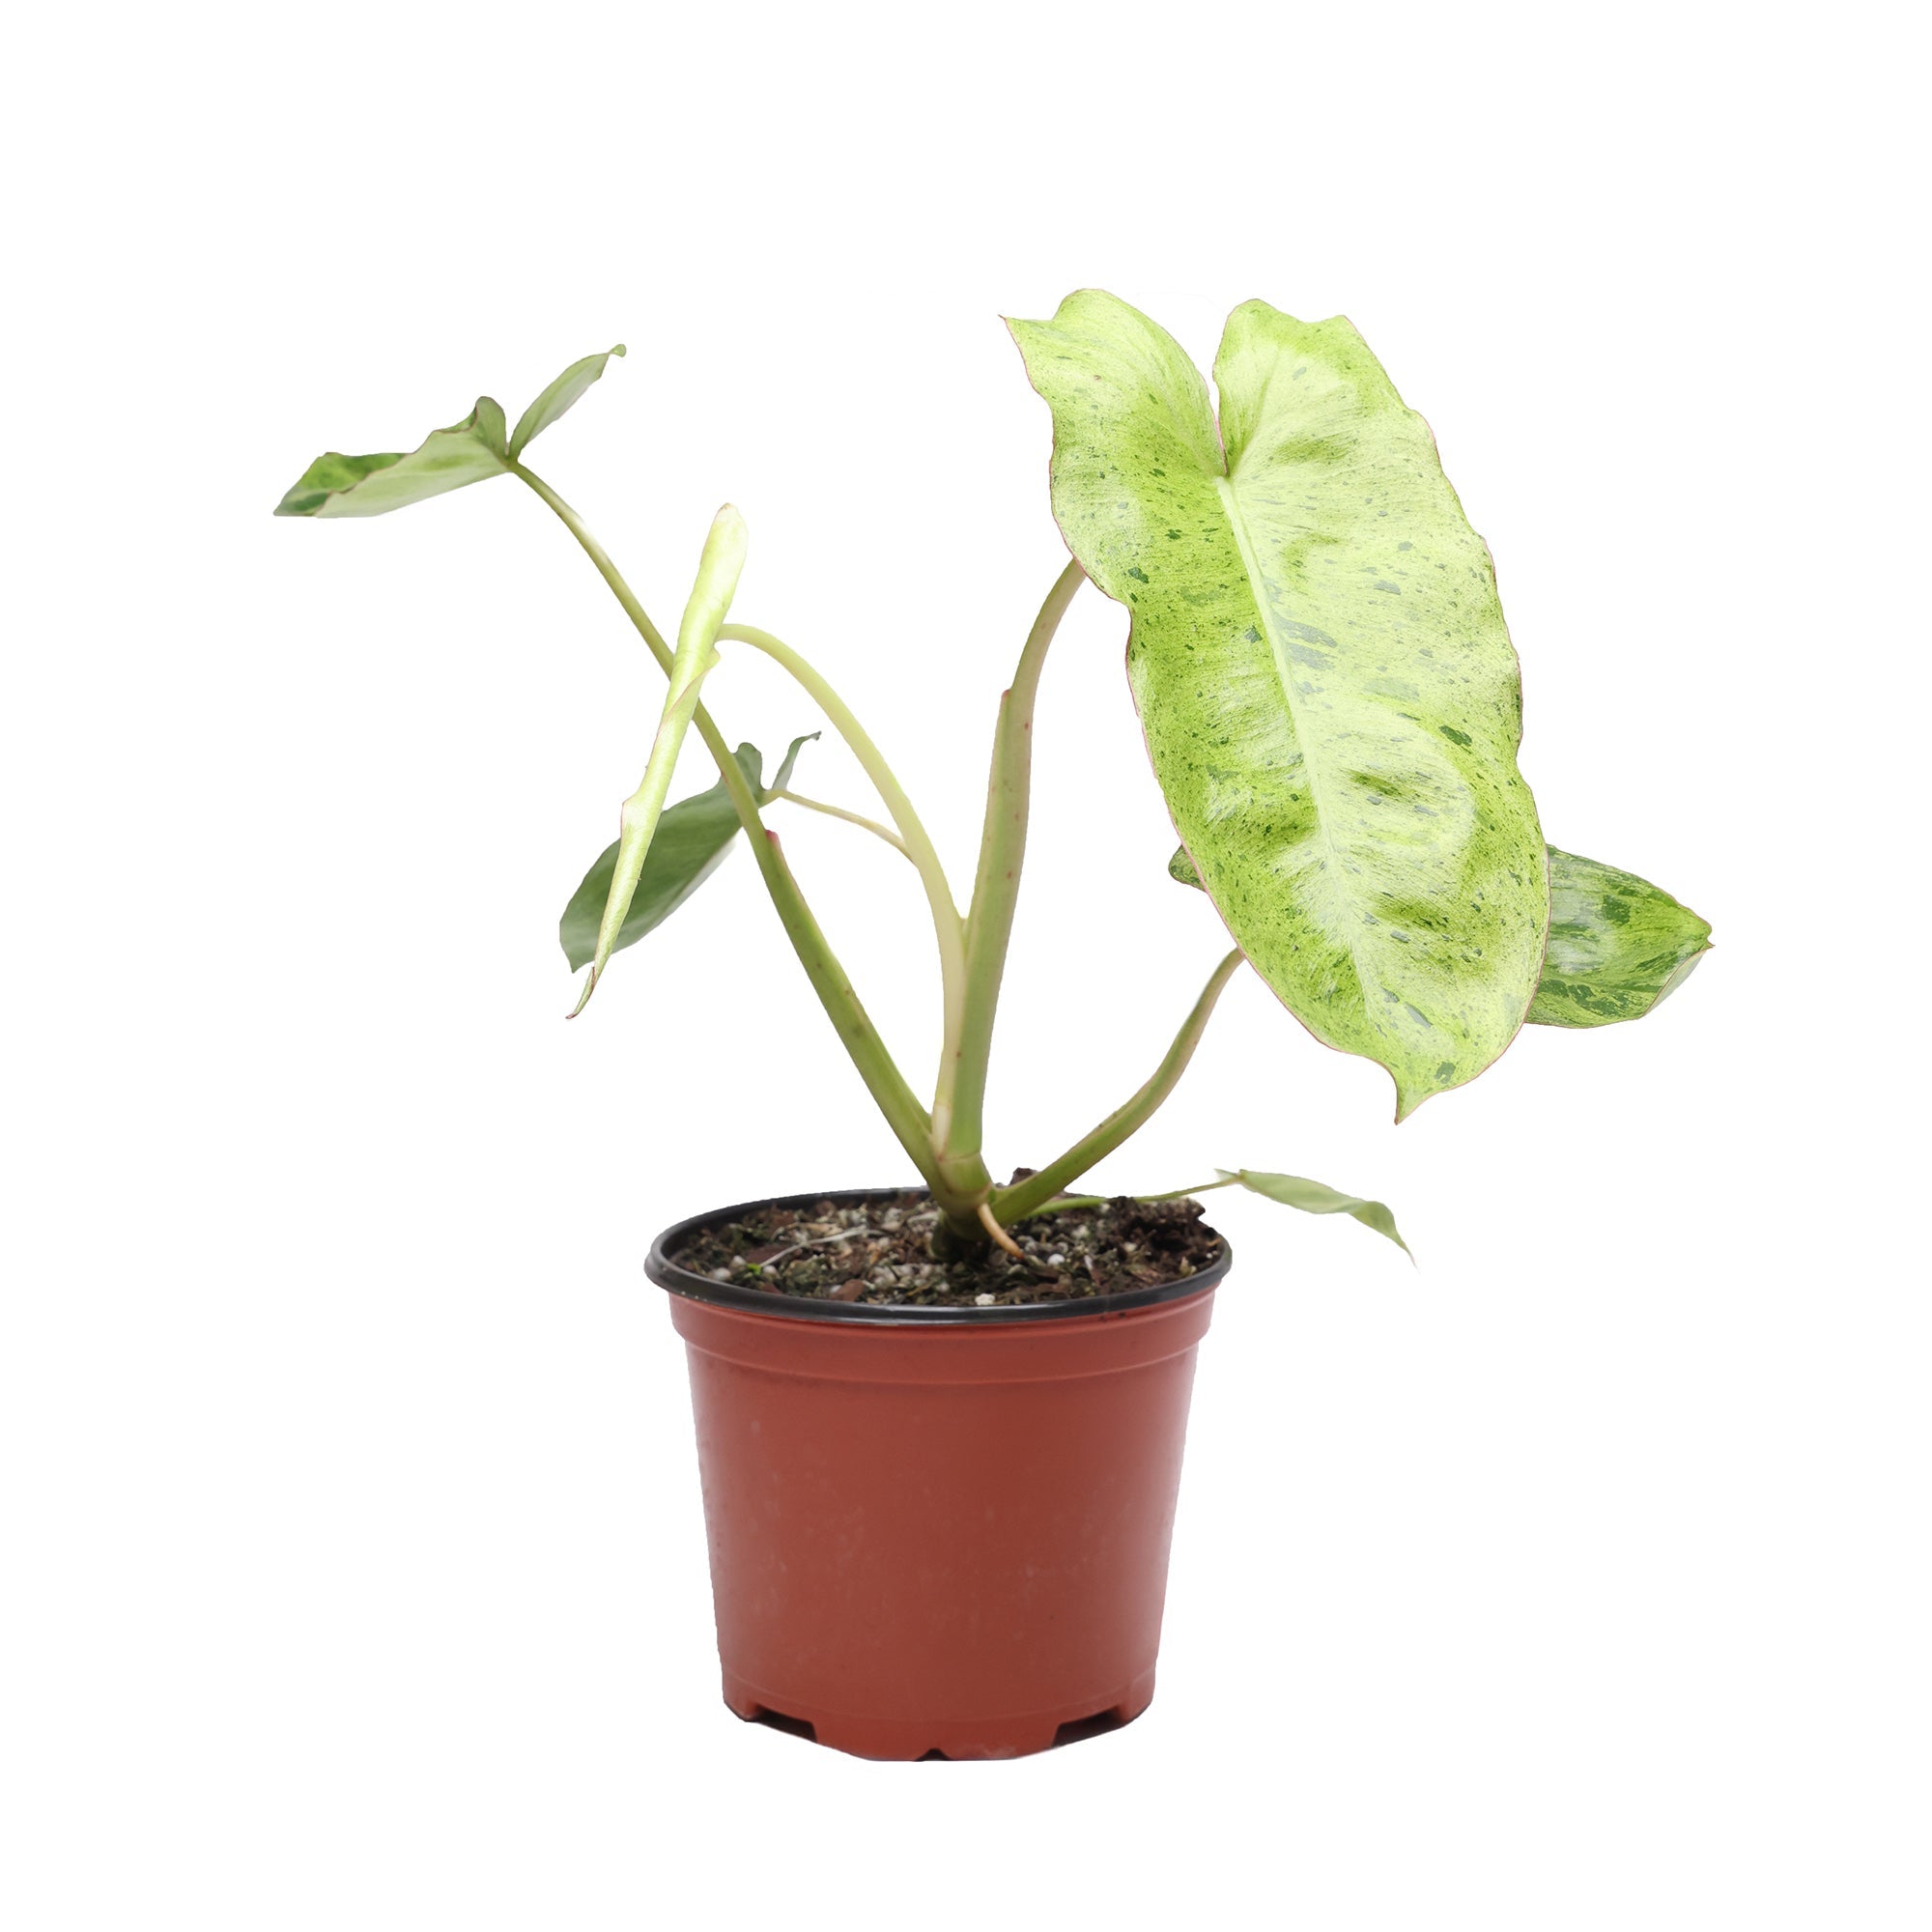 A small Philodendron Paraiso Verde 6 Inches plant from Chive Studio, with a tall green stem and two large, light green leaves, set against a white background.